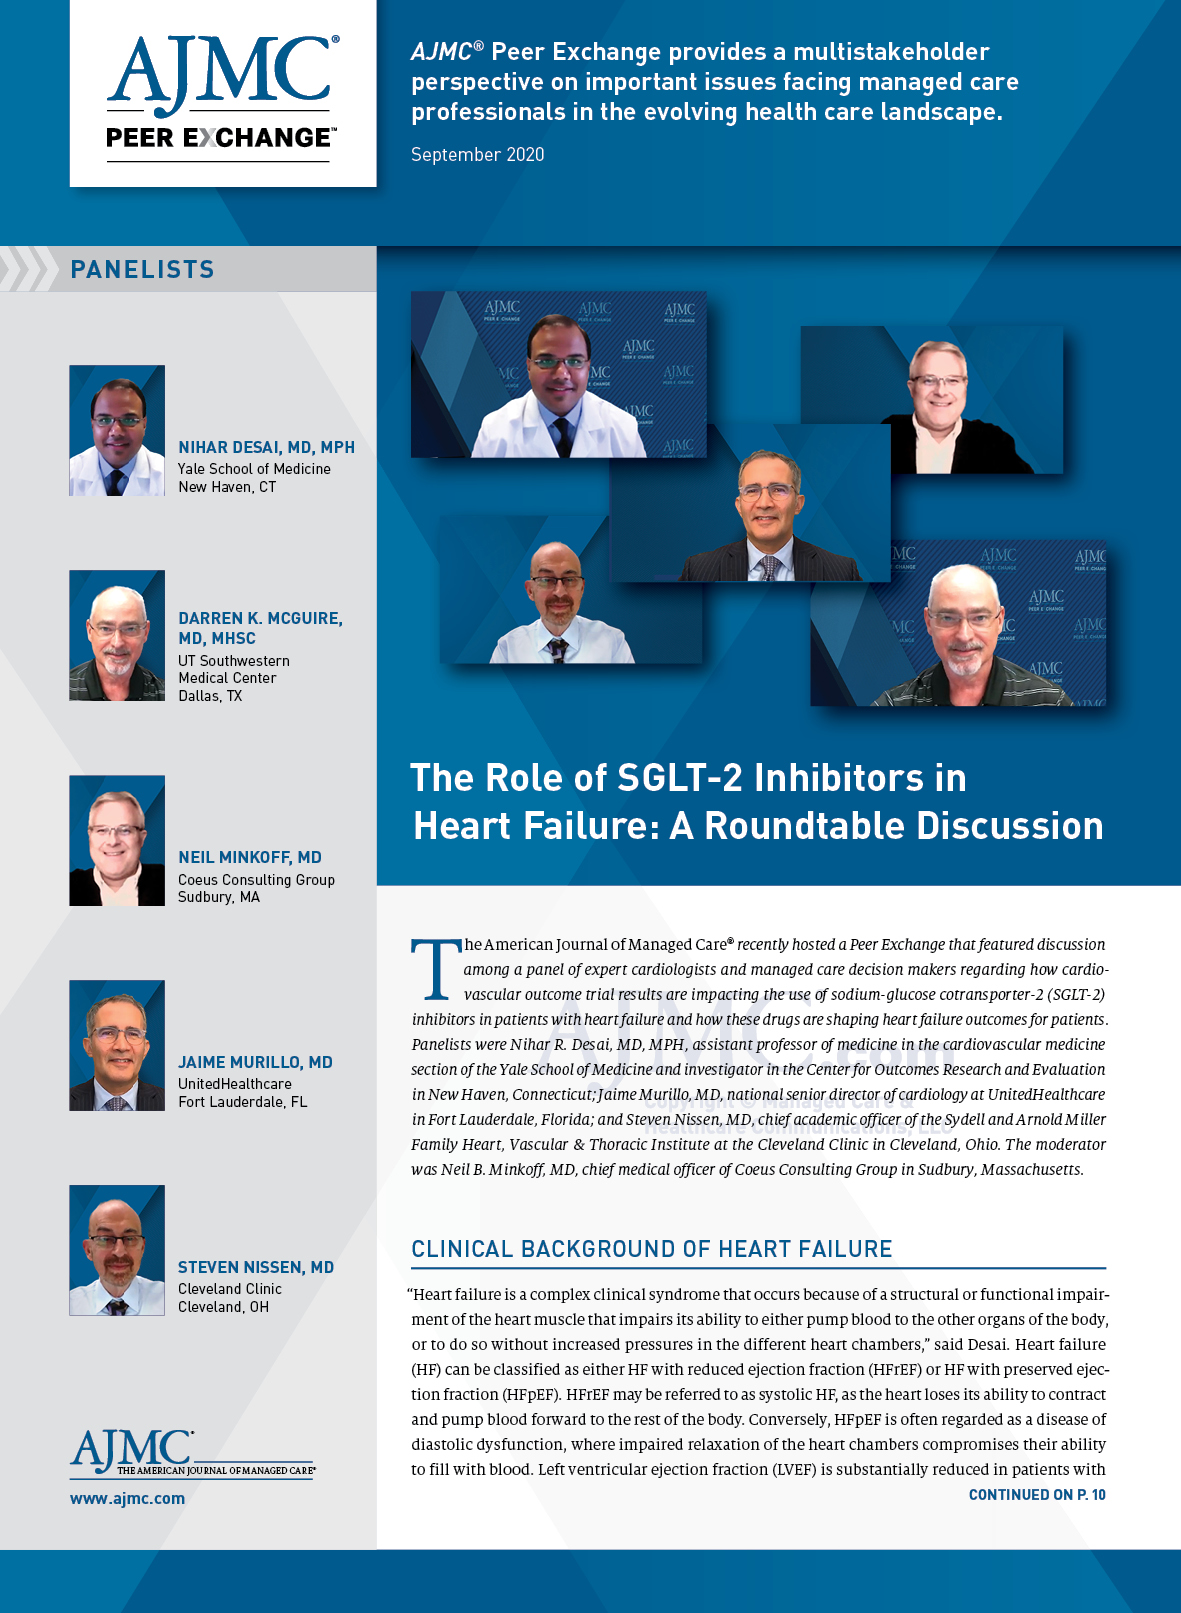 The Role of SGLT-2 Inhibitors in Heart Failure: A Roundtable Discussion 